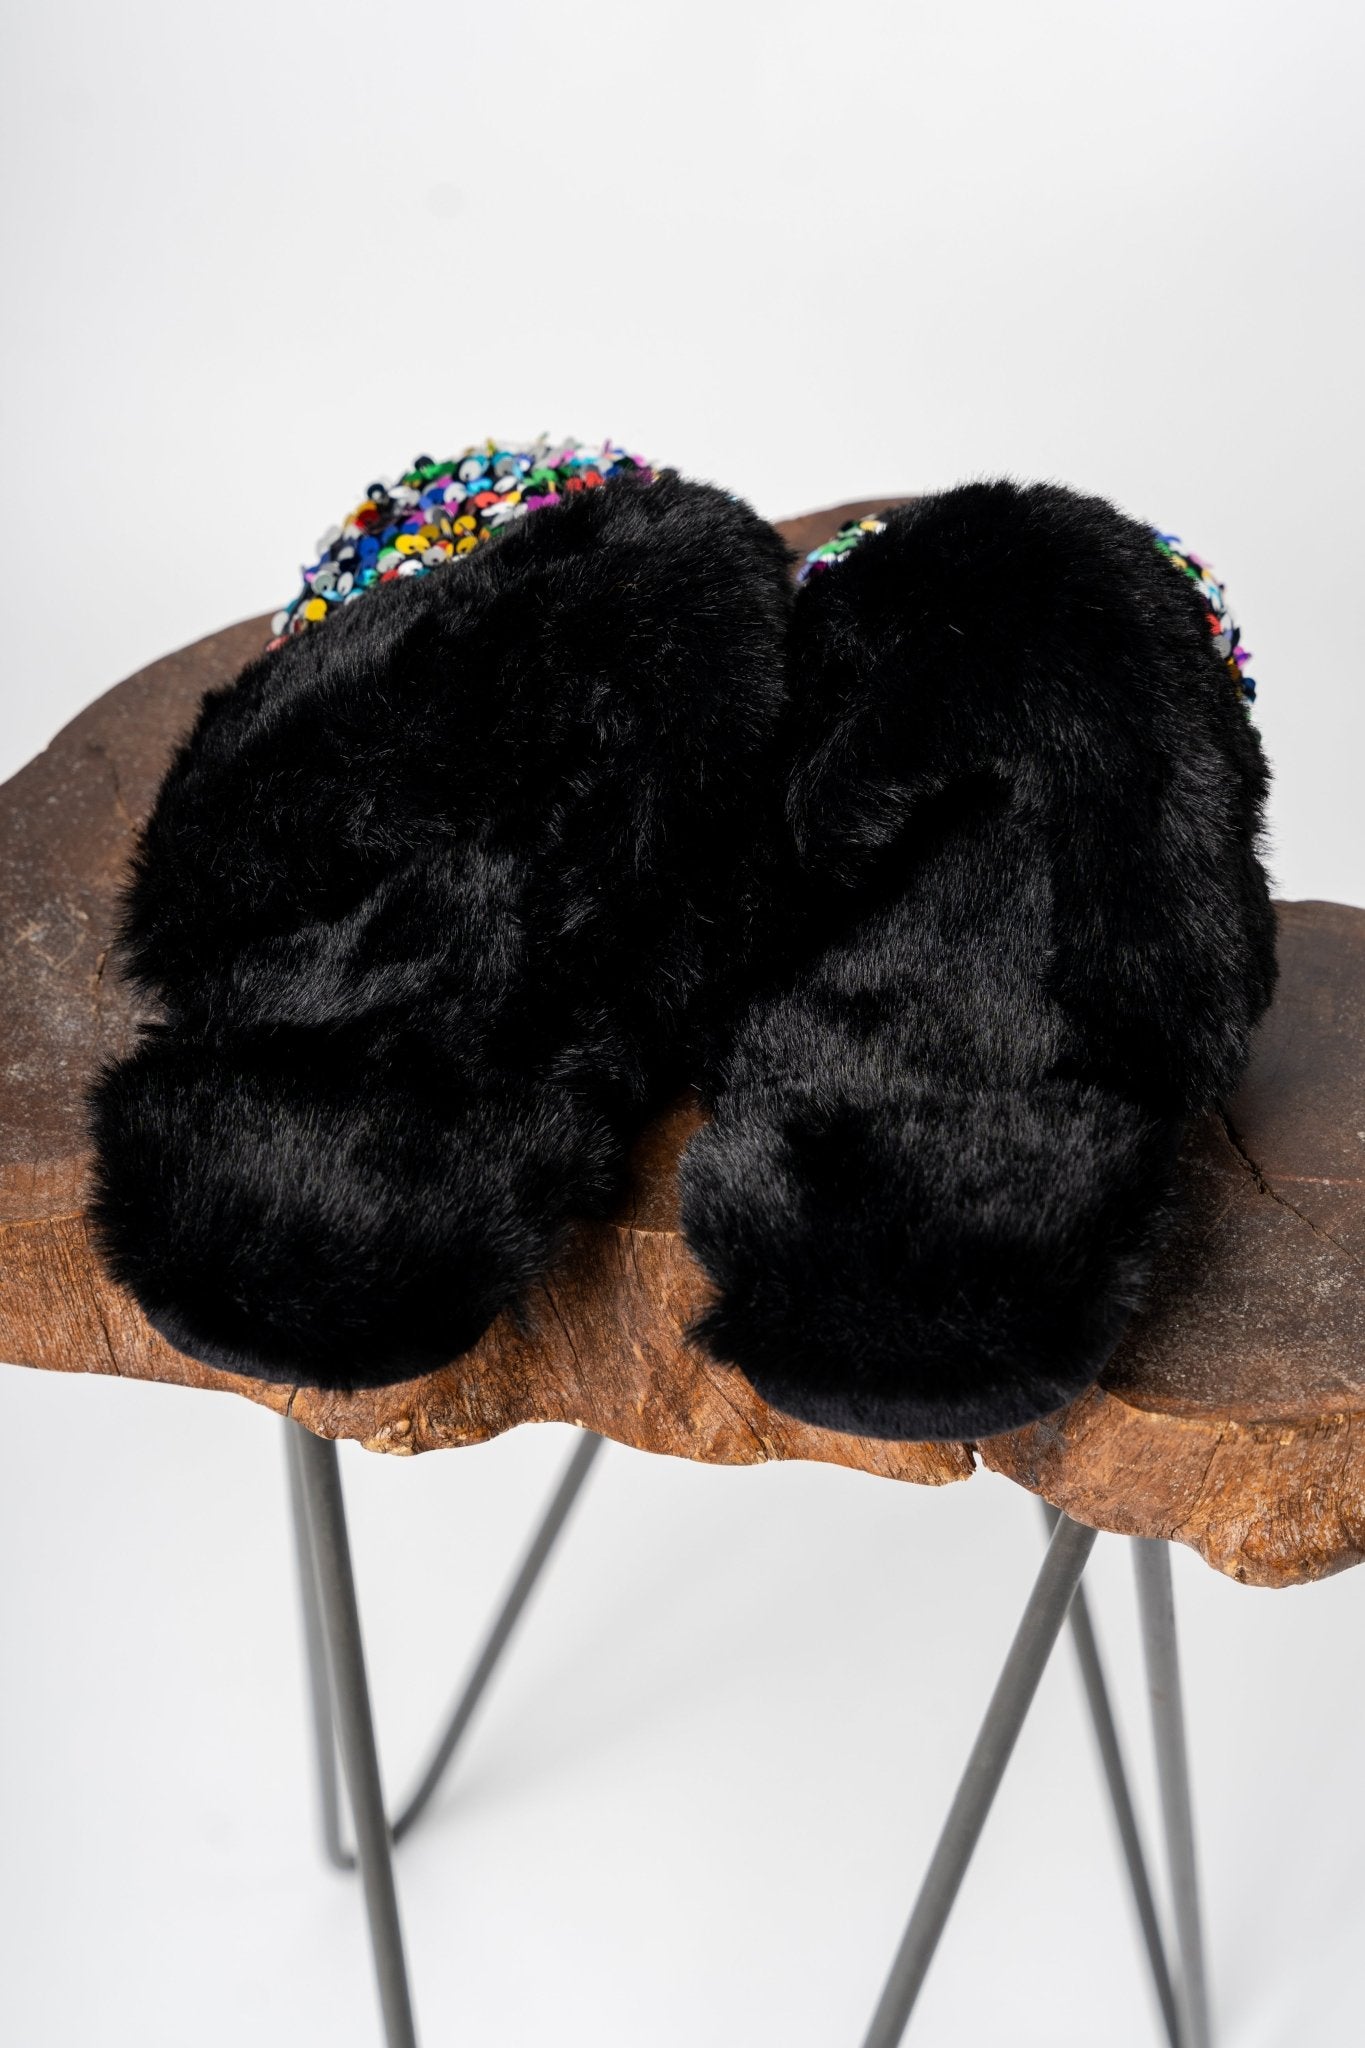 Fiesta sequin slippers black - Trendy Gifts at Lush Fashion Lounge Boutique in Oklahoma City